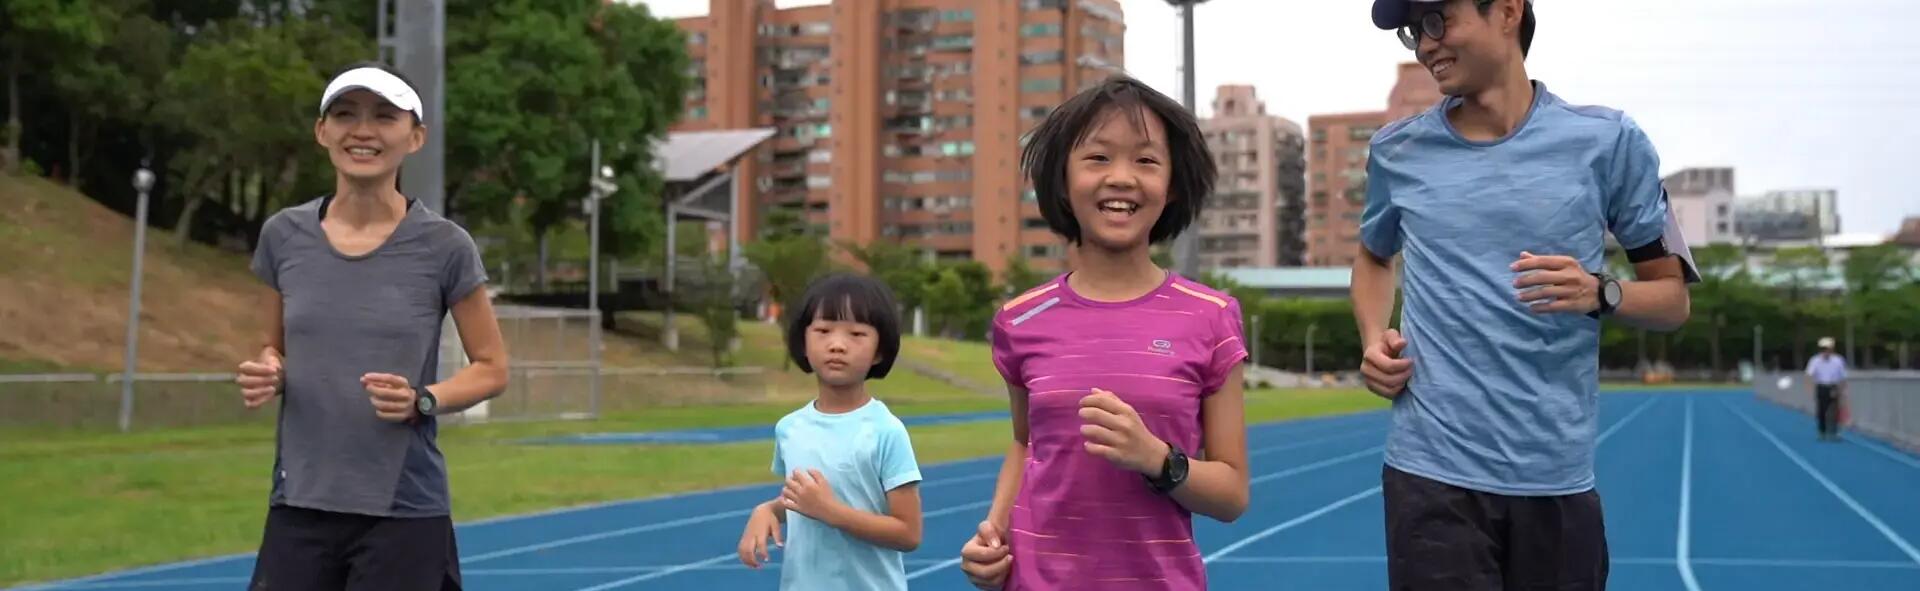 Running | Benefits and tips for running with kids in the pandemic